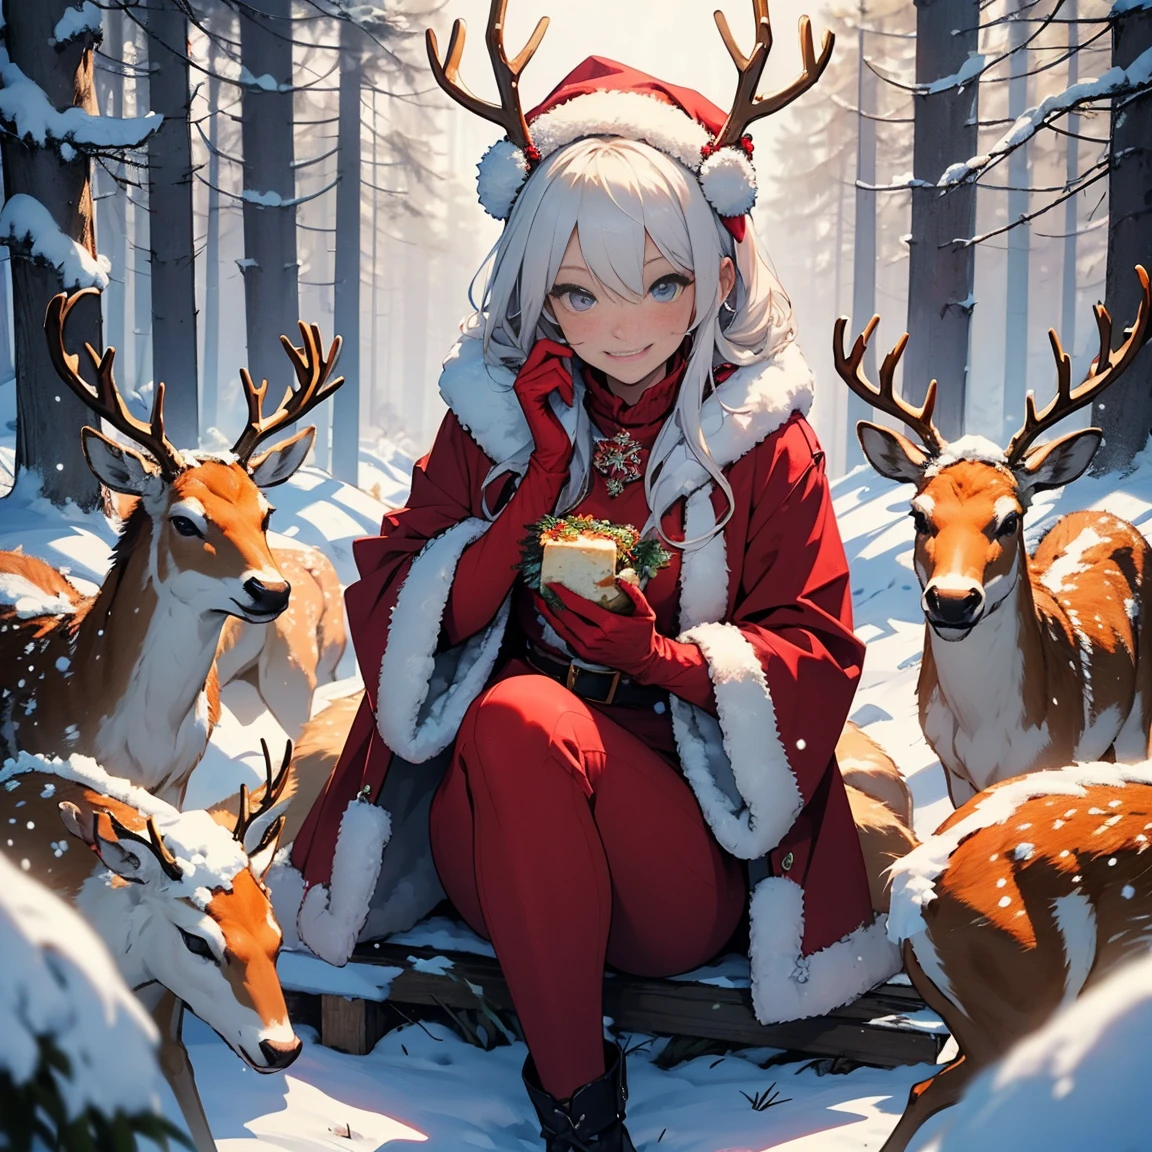 Merry Christmas, Snow Maiden in a sexy red suit, Smiling, Forest deer, Snow Maiden feeds deer bread, forest with trees, garlands on branches